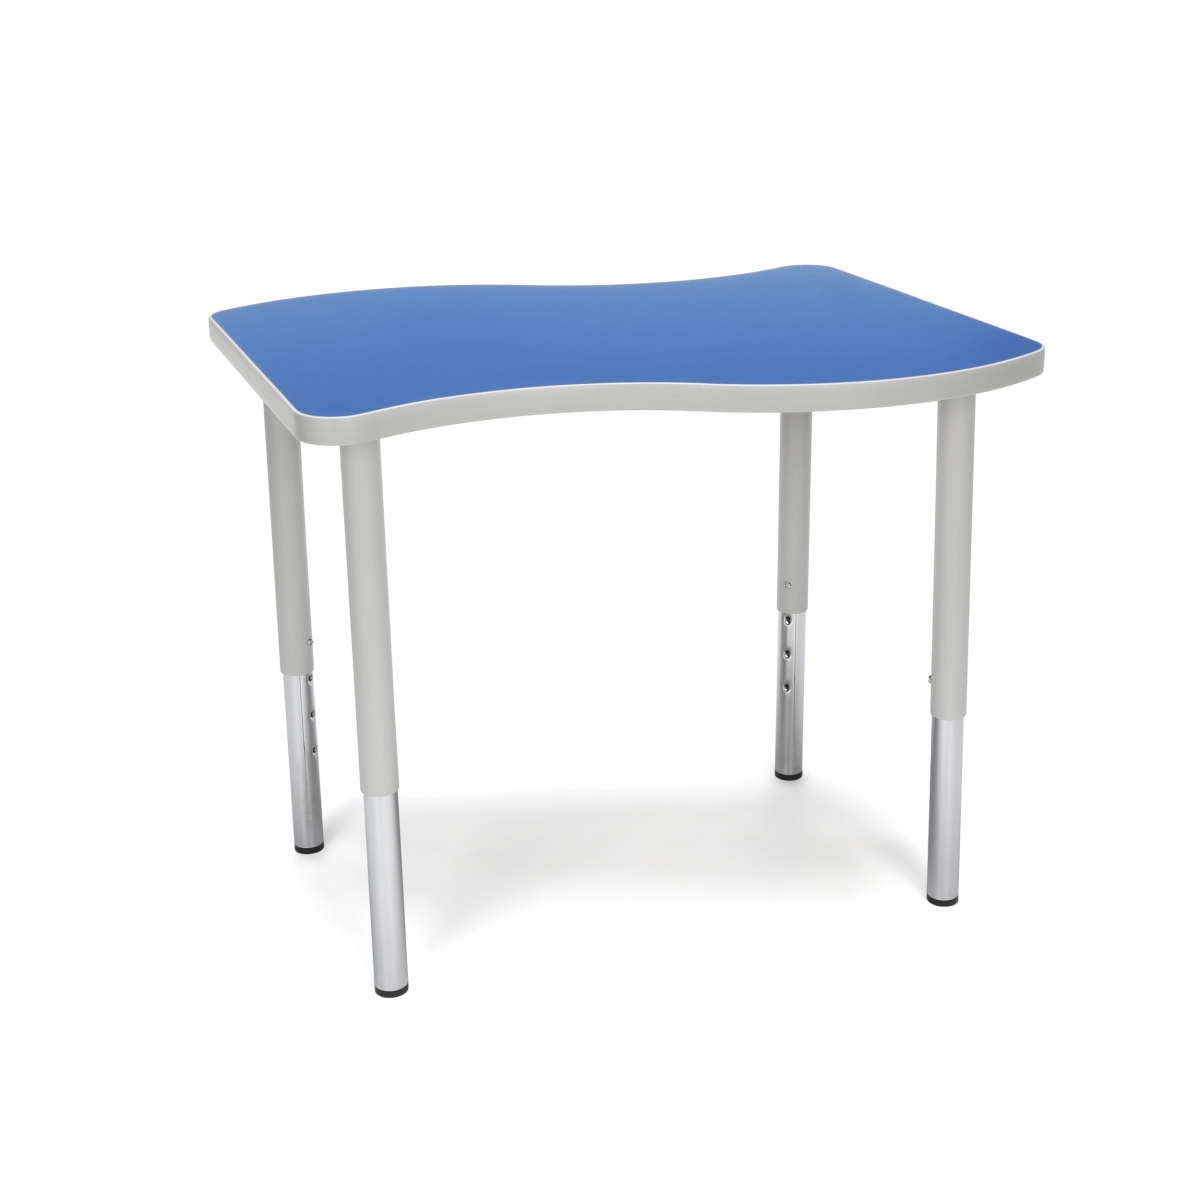 Wave-s-ll-blu Adapt Series Small Wave Standard Table - 23-31 In. Height Adjustable Desk, Blue